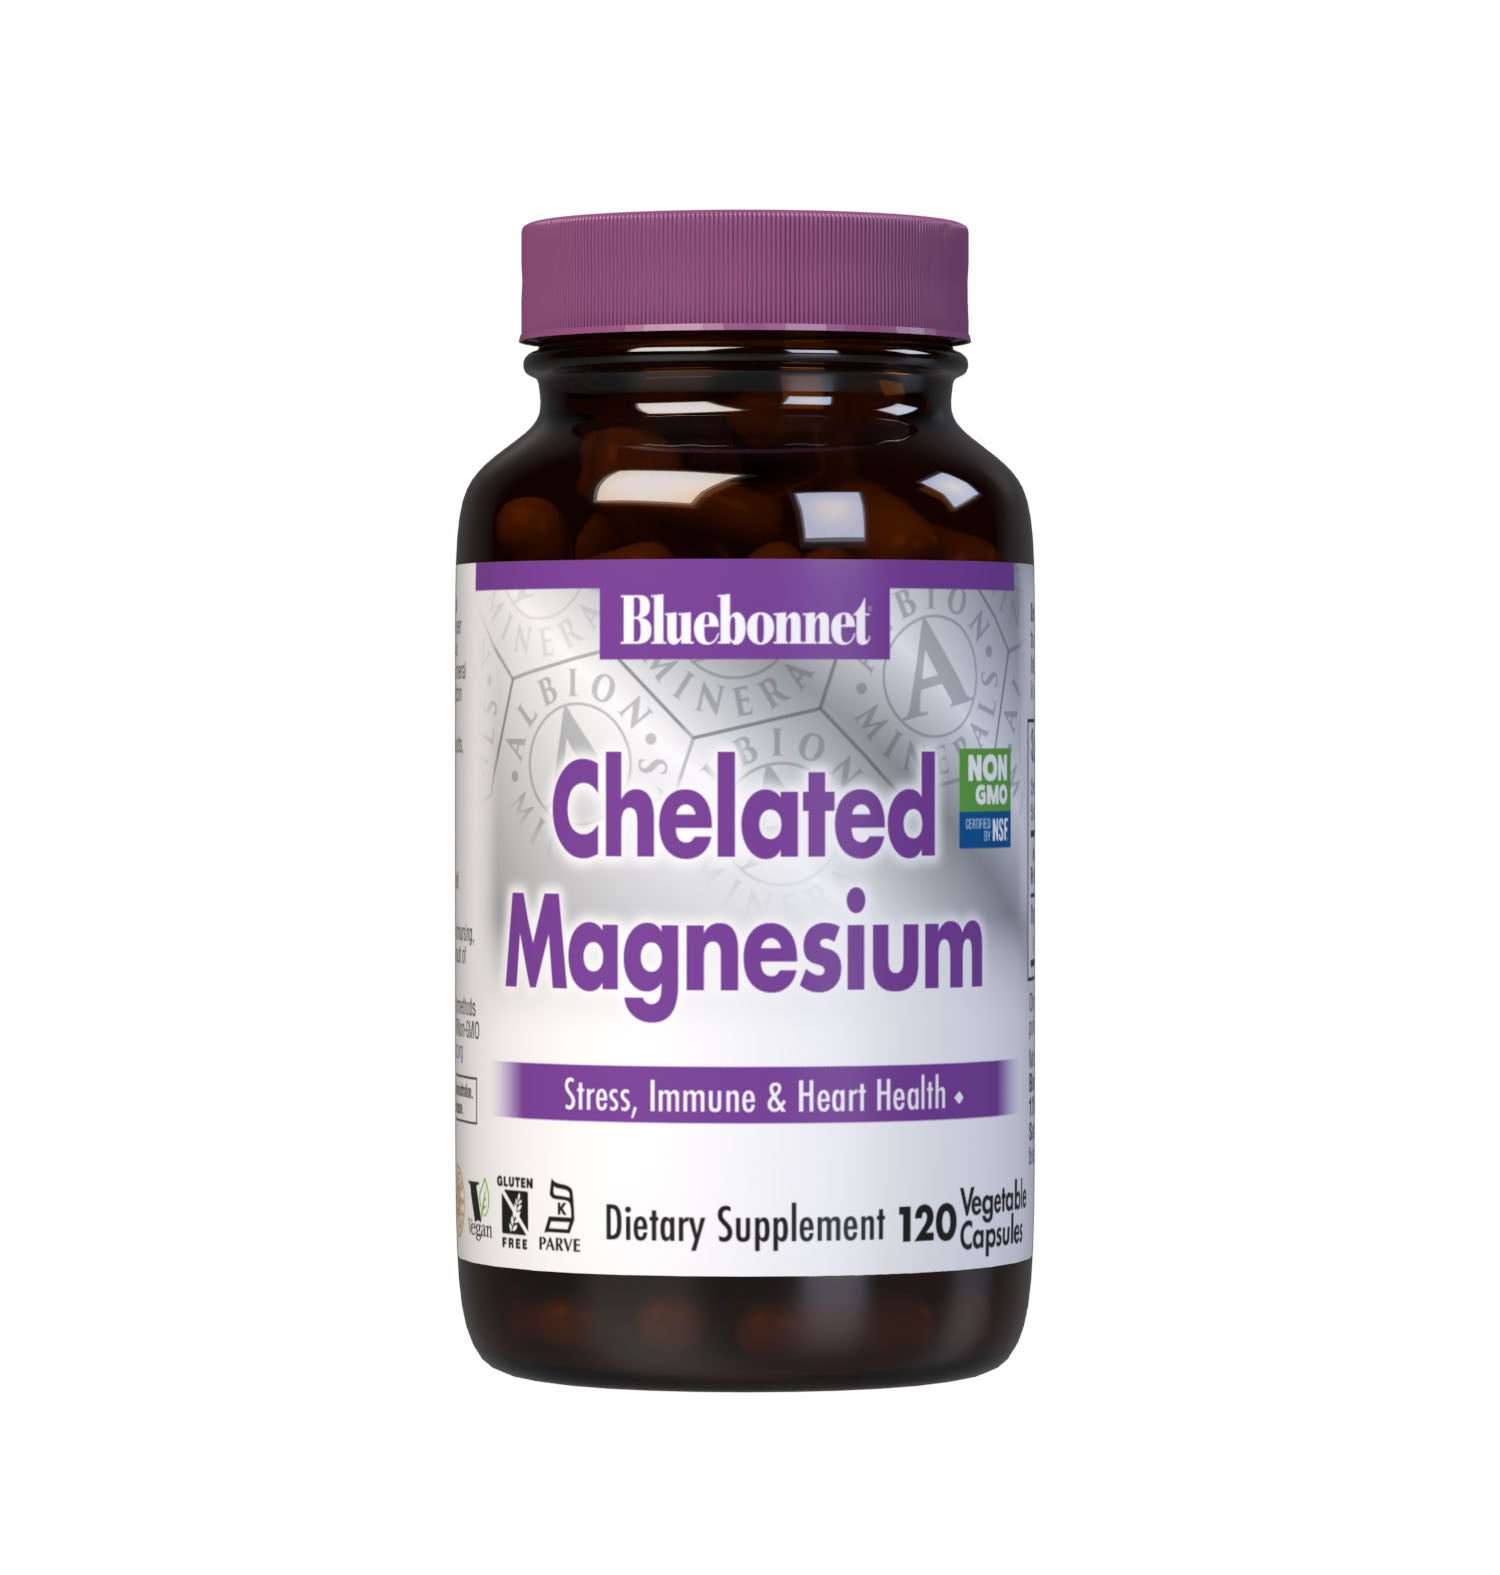 Bluebonnet's Chelated Magnesium Bisglycinate 120 Vegetable Capsules are formulated with 200 mg per serving of elemental magnesium from fully reacted magnesium bisglycinate, an amino acid chelate mineral from Albion that supports energy production and is critical for enzyme function. #size_120 count